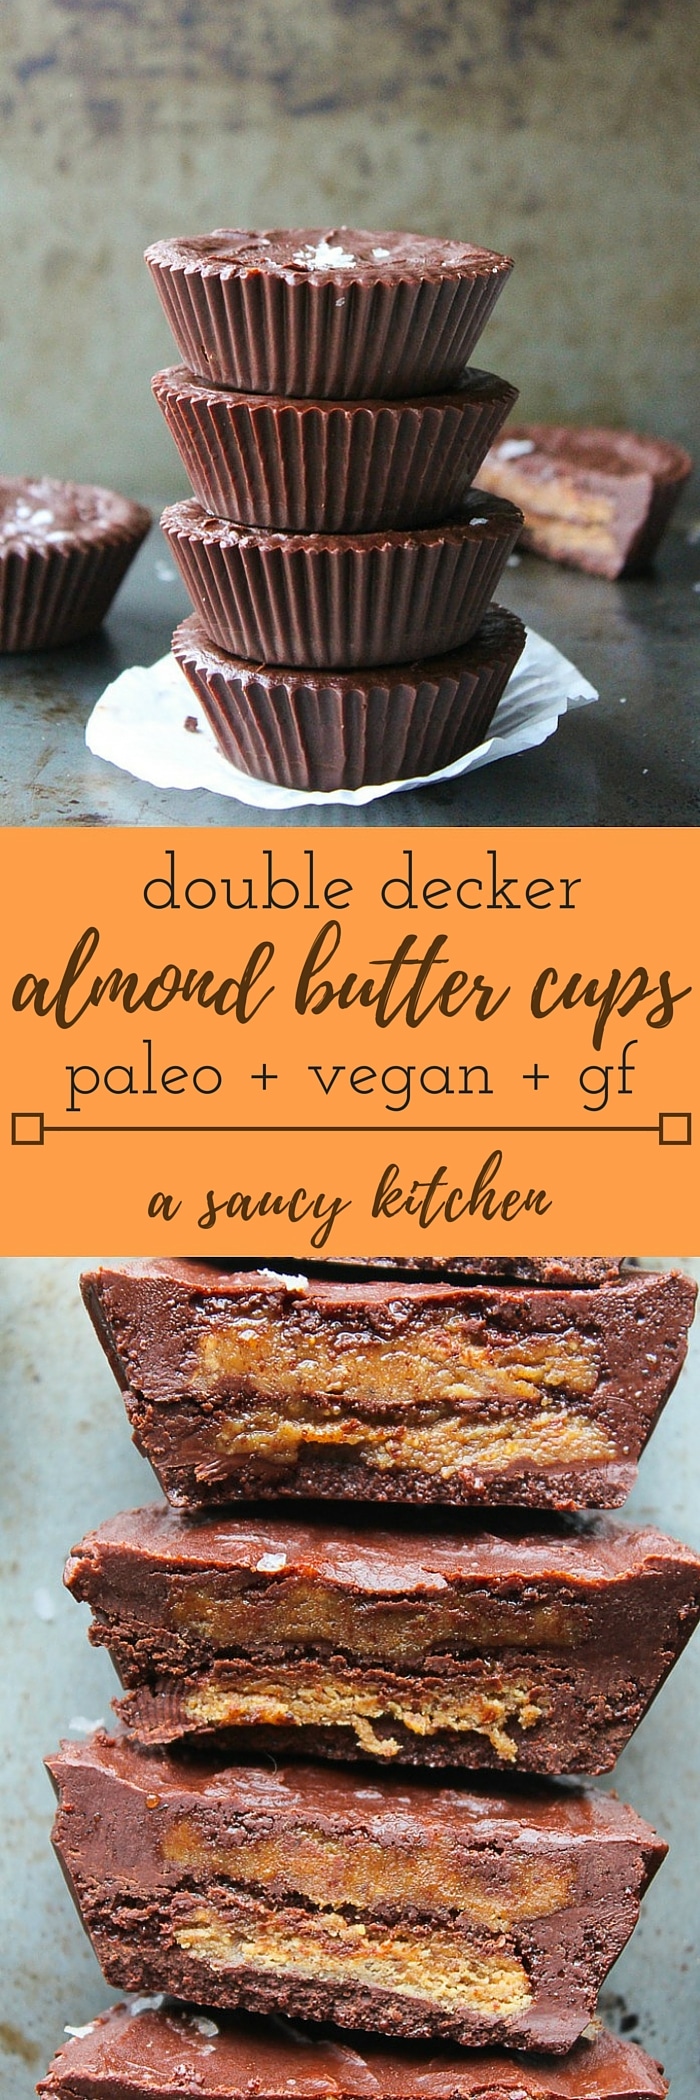 Double Decker Almond Butter Cups - made with six ingredients! Paleo, Vegan, and low FODMAP